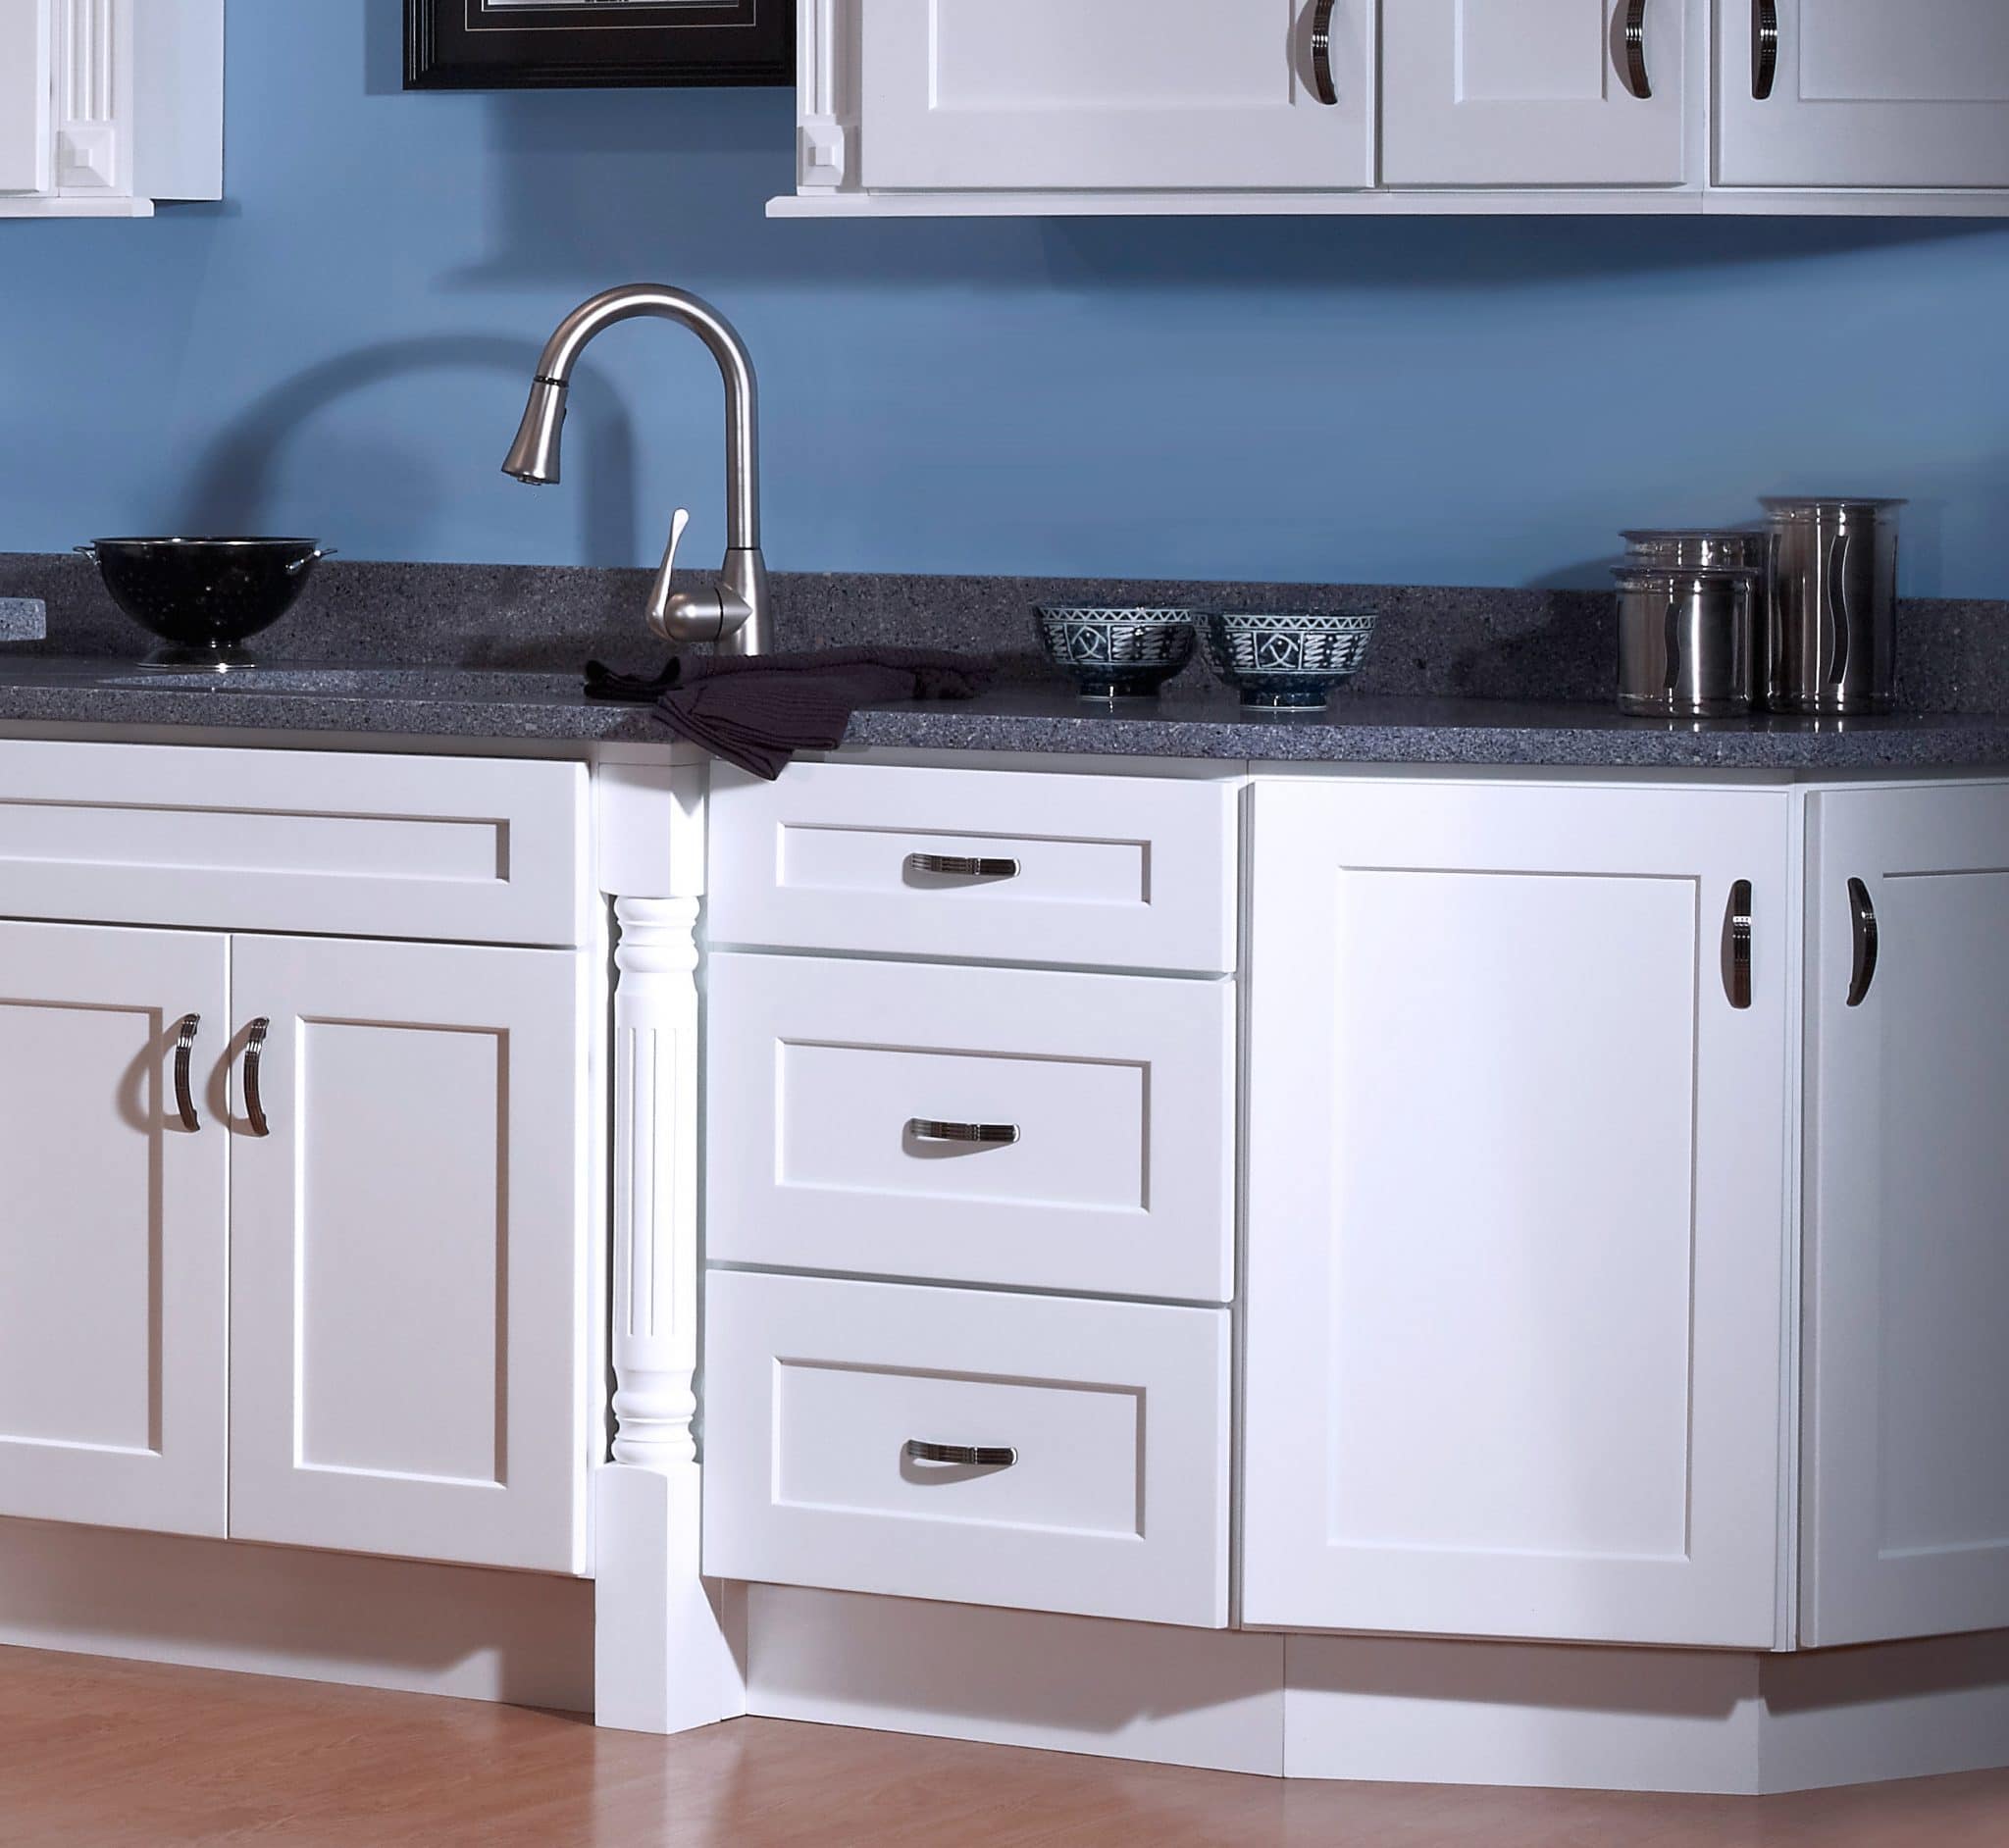 What is a Shaker Style Kitchen Cabinet? Should you get Shaker